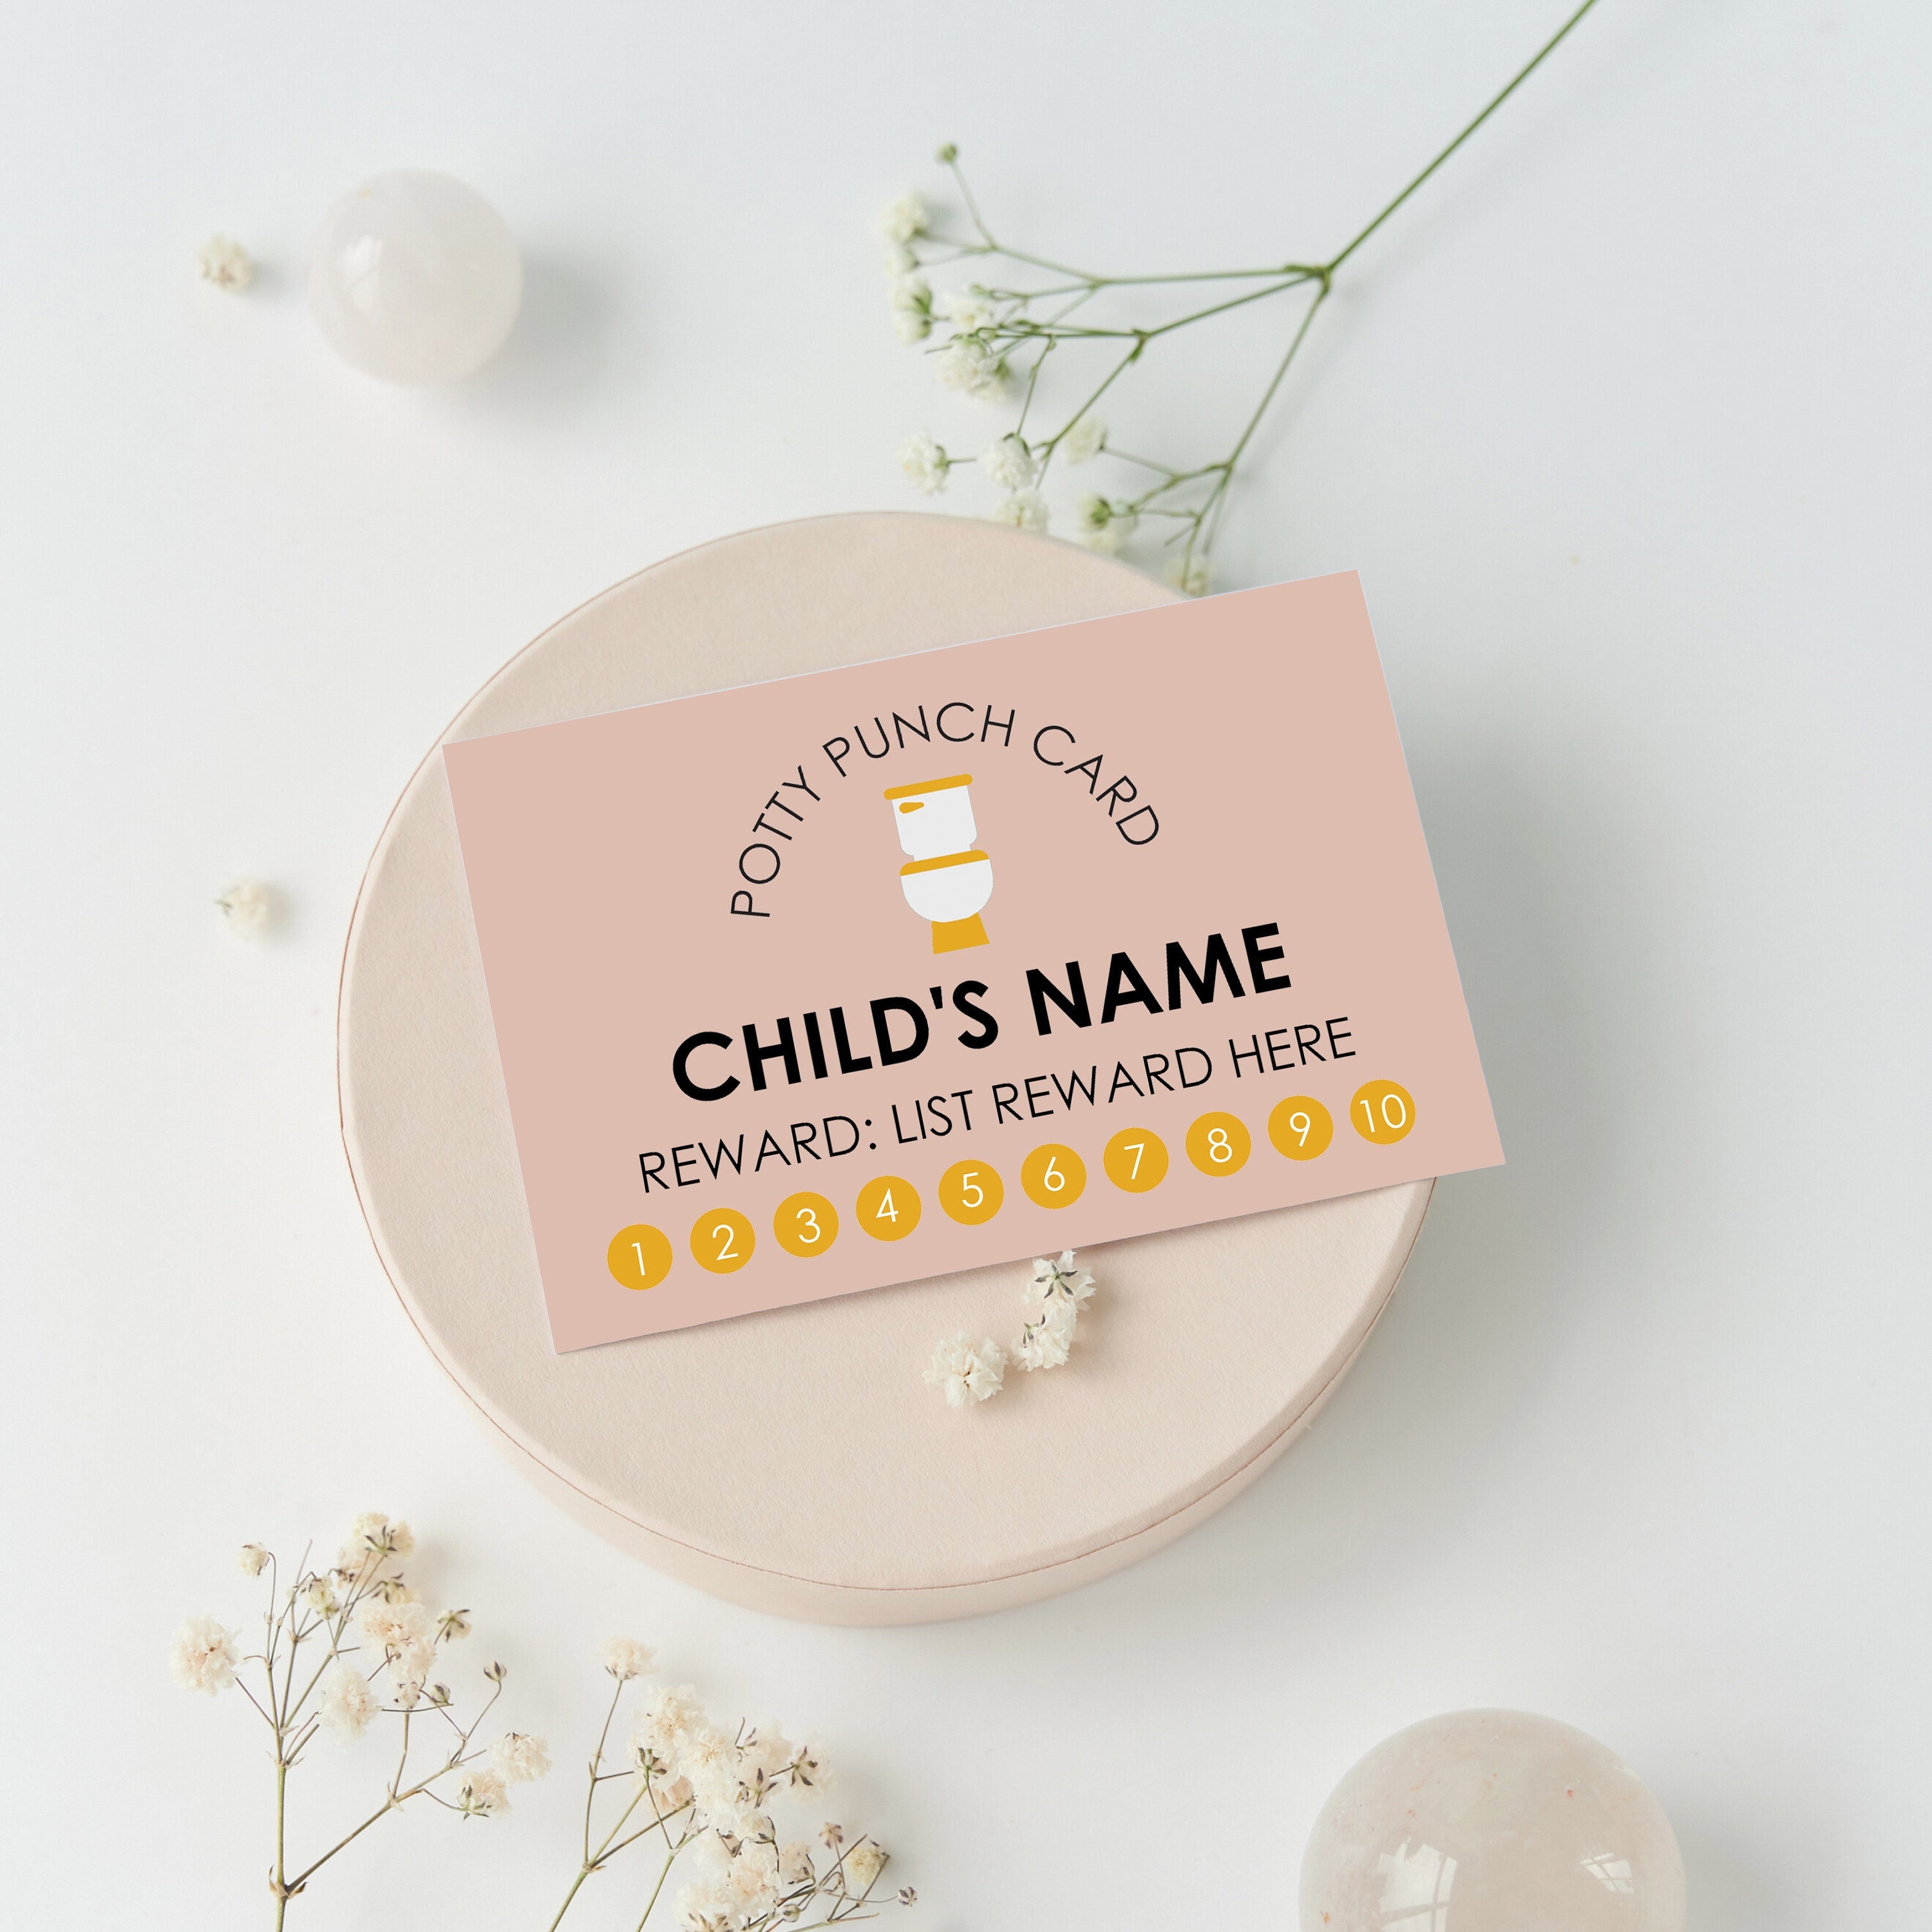 Cute Punch Cards for Kids: Great for Parents and Teachers!